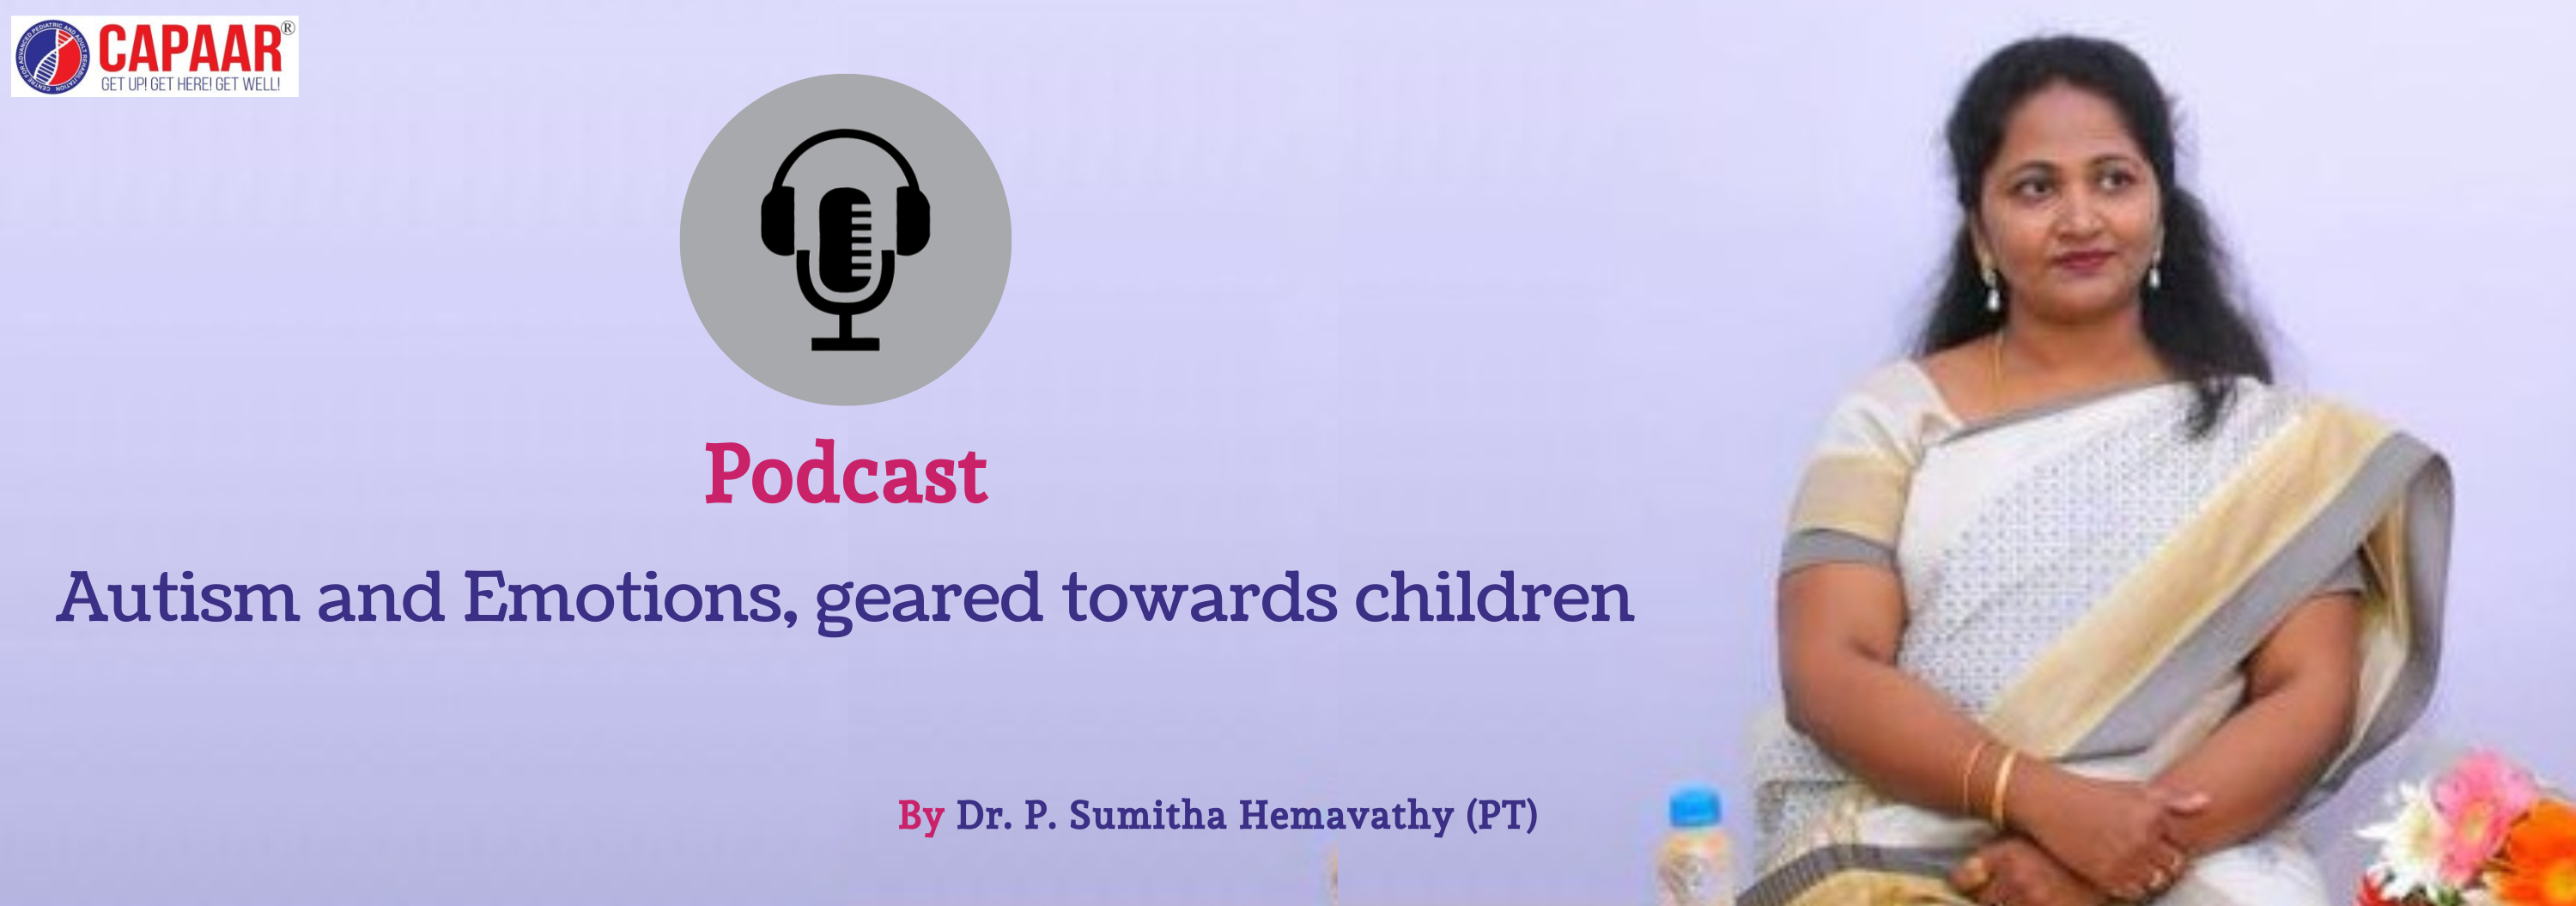 Podcast On Autism and Emotions, geared towards children - CAPAAR